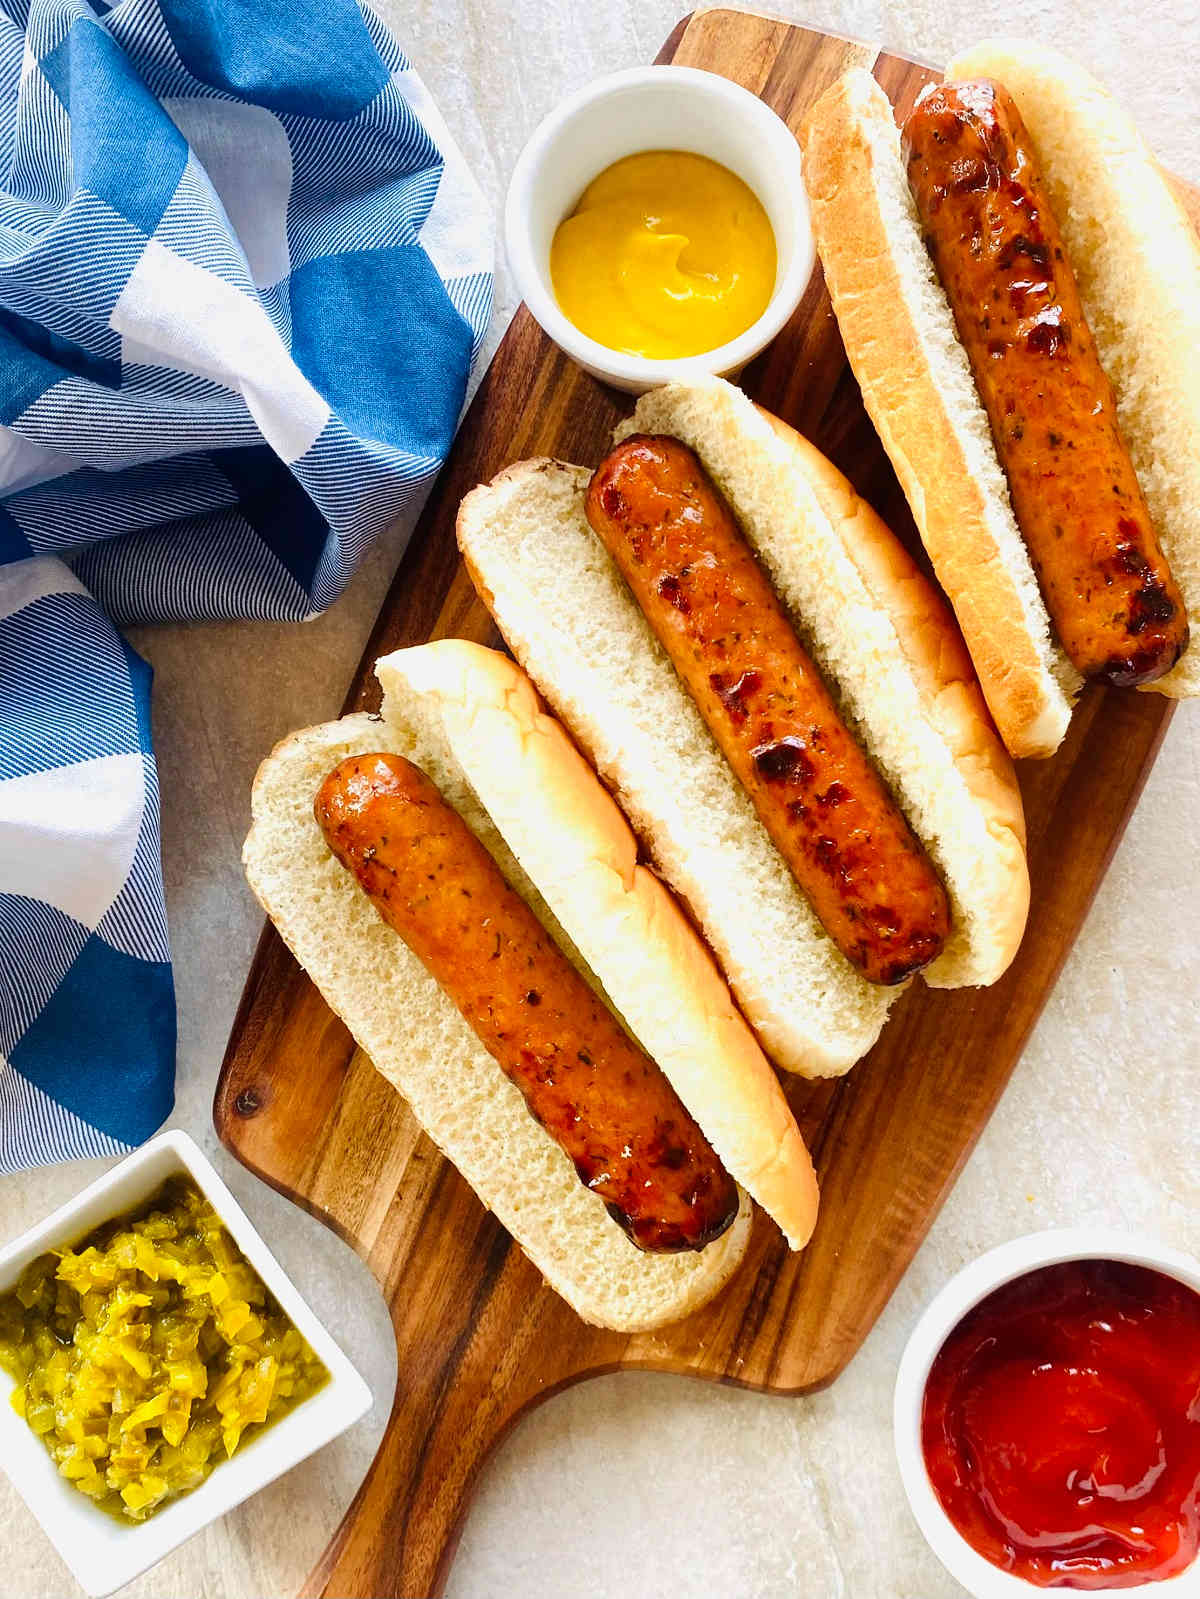 chicken sausage air fryer in buns with ketchup, relish and mustard.